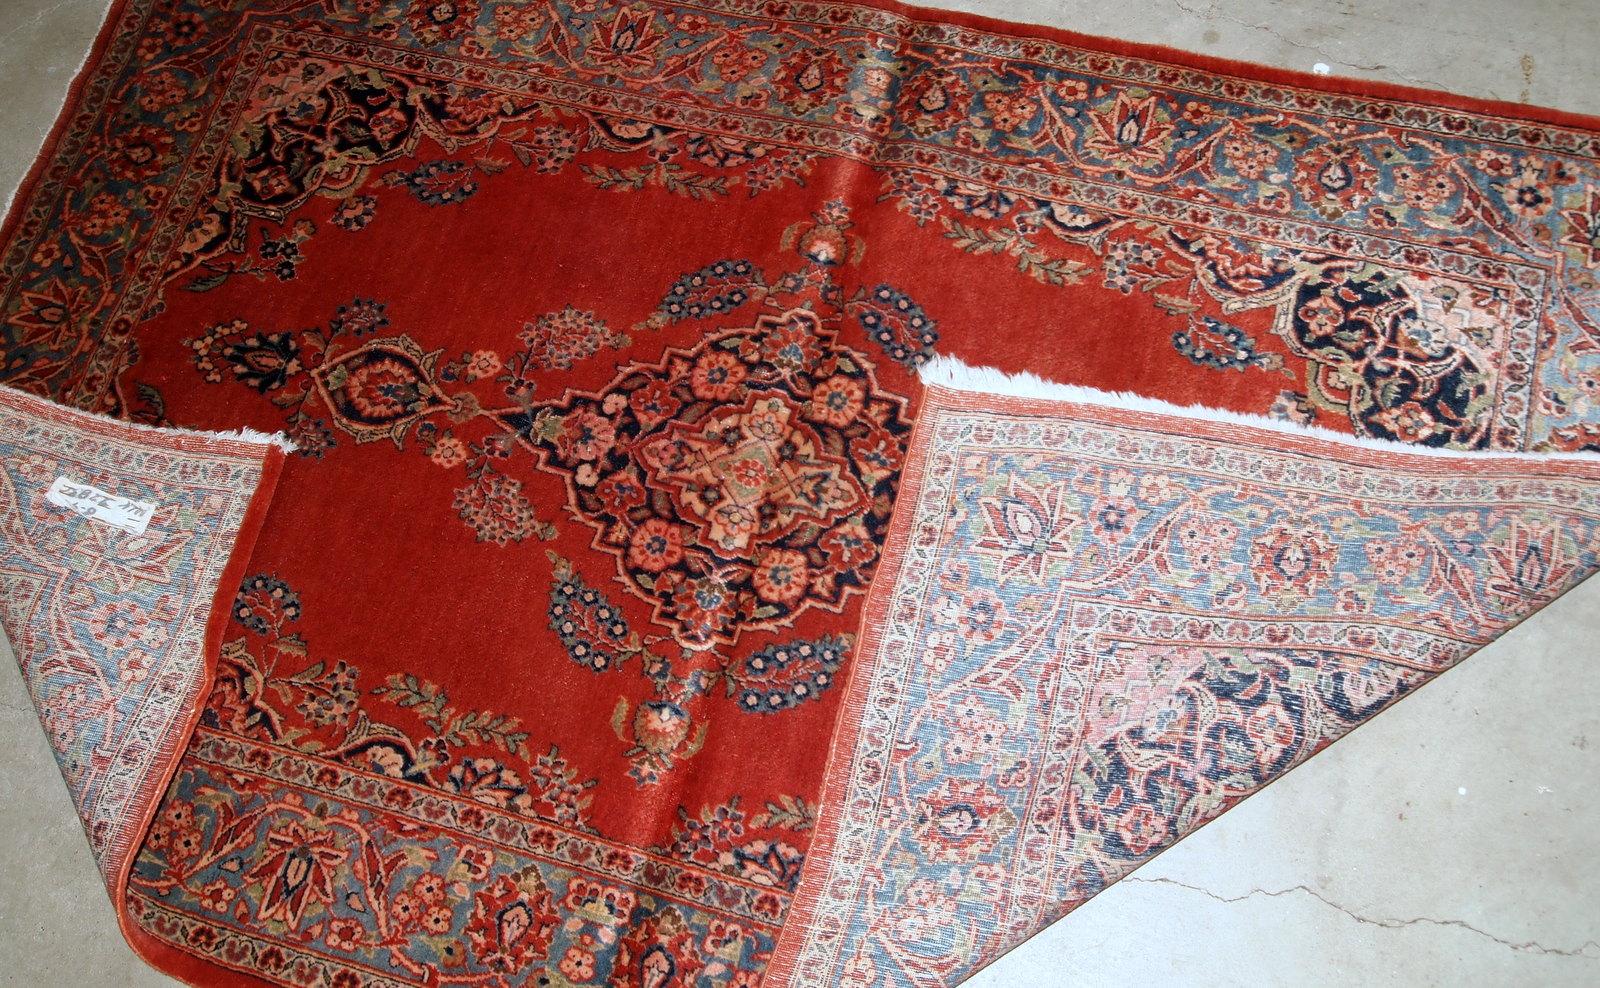 Handmade antique Sarouk style rug in original good condition. The rug is from the beginning of 20th century made in bright red wool. 

?-condition: original good,

-circa: 1910s,

-size: 3.4' x 5.3' (103cm x 161cm),

-material: